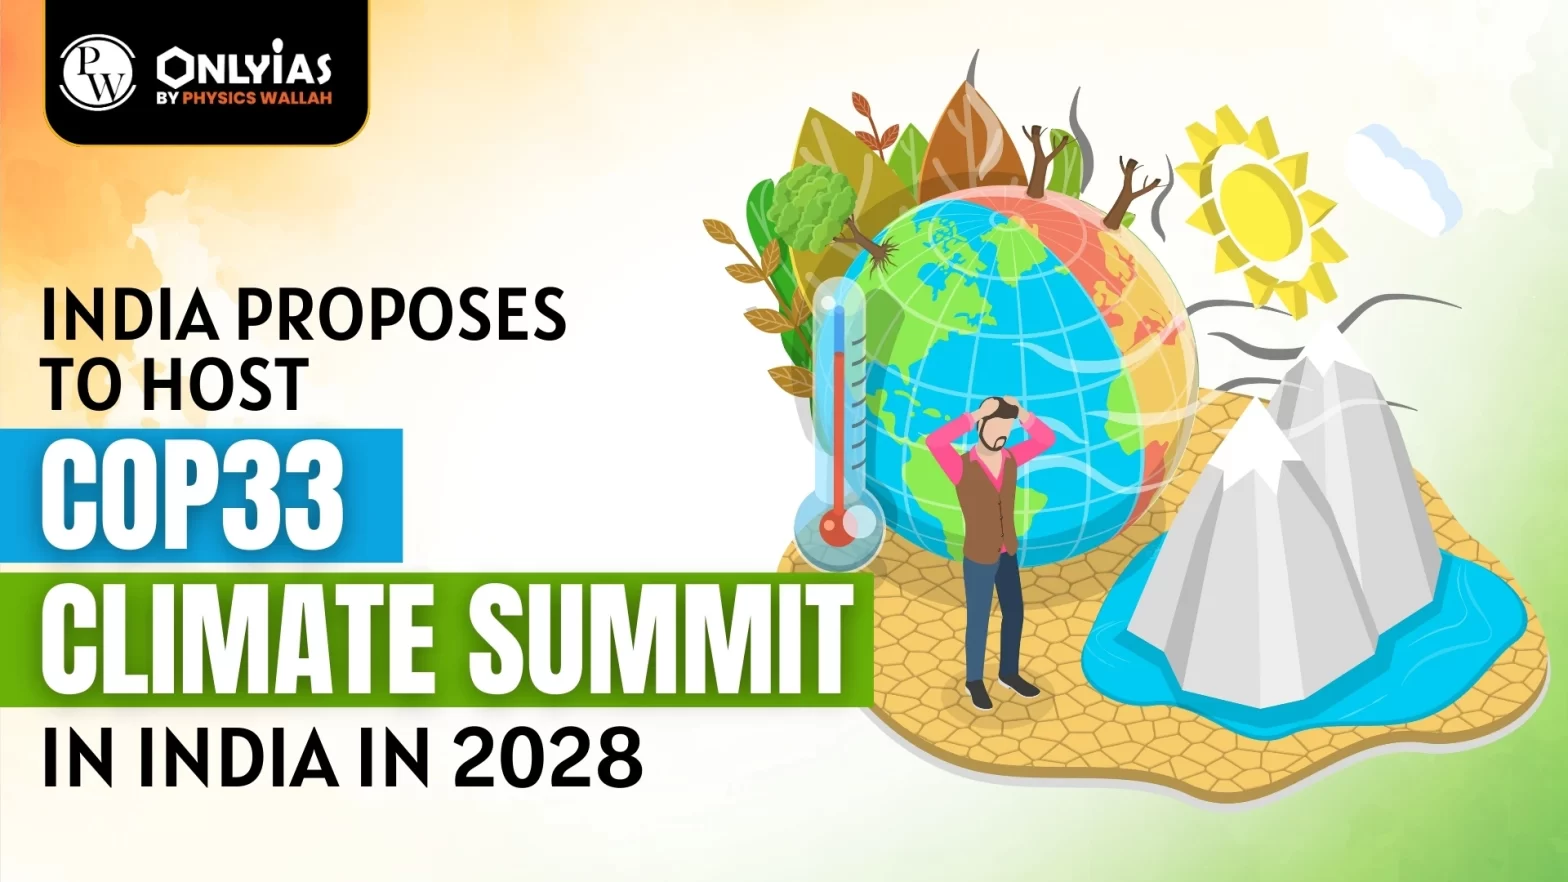 India Proposes to Host COP33 Climate Summit in India in 2028